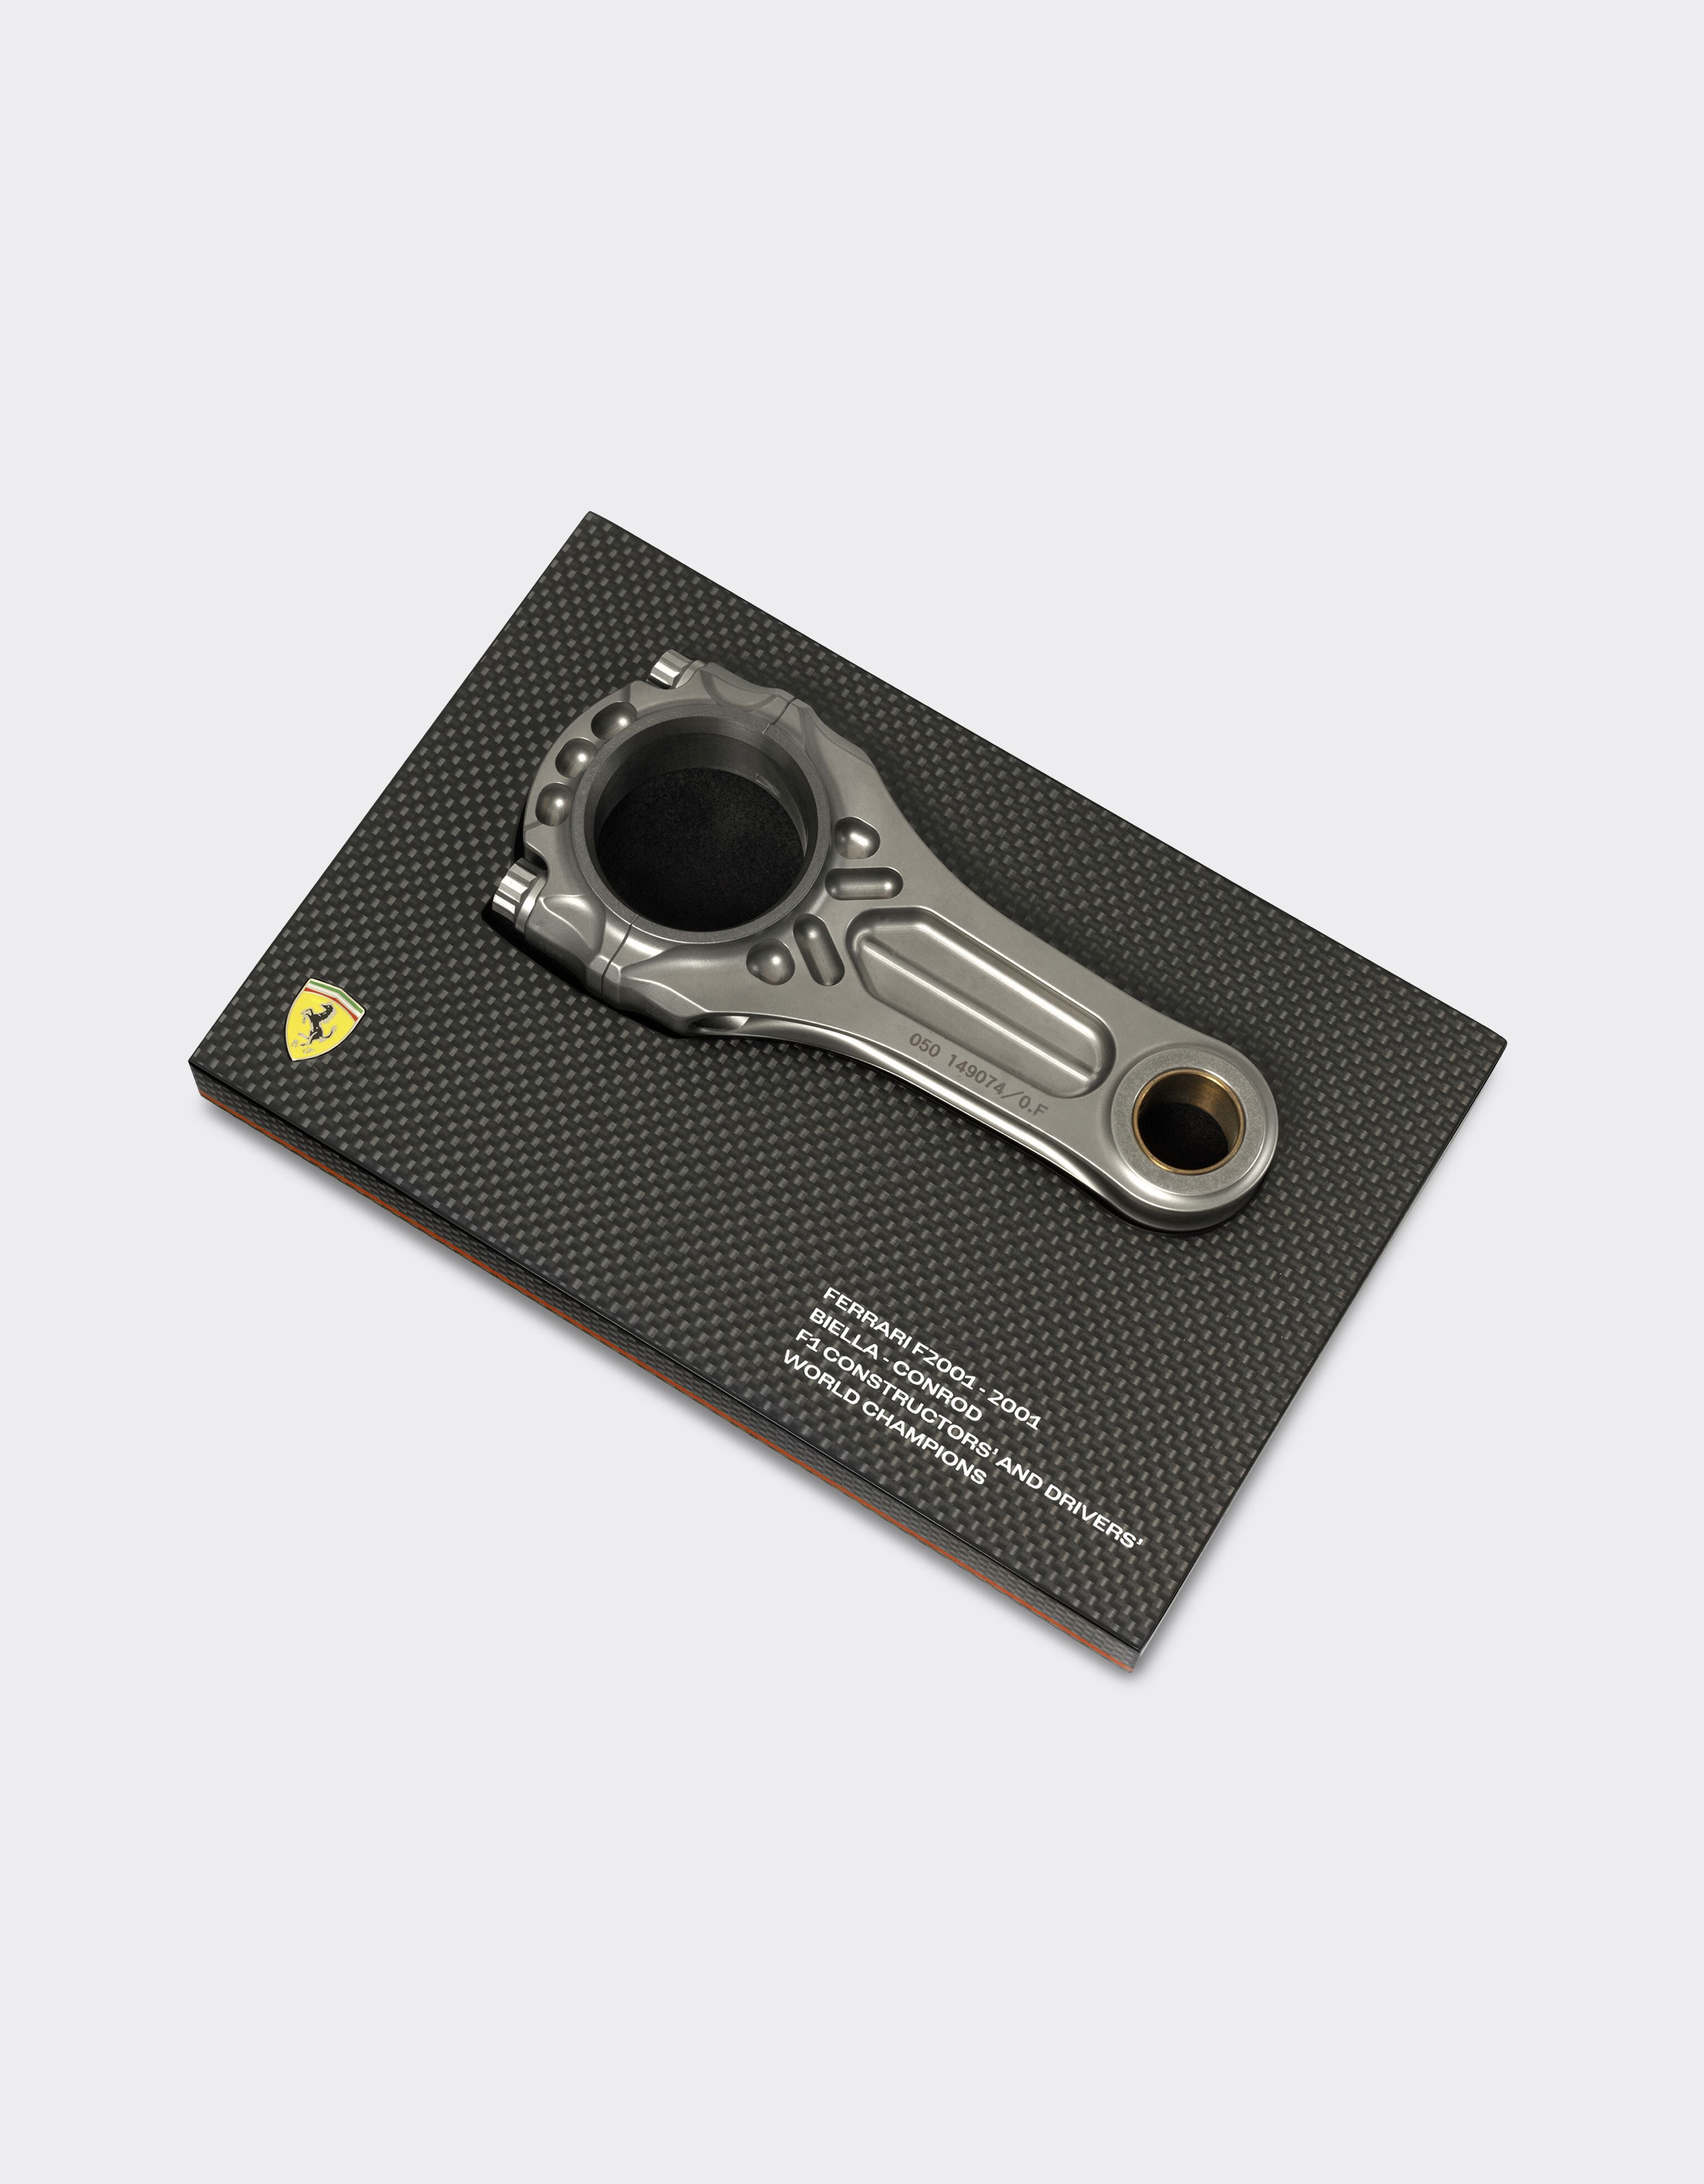 Ferrari Original connecting rod from the F2001, winner of the 2001 Constructors' and Drivers' Championships Black 47415f